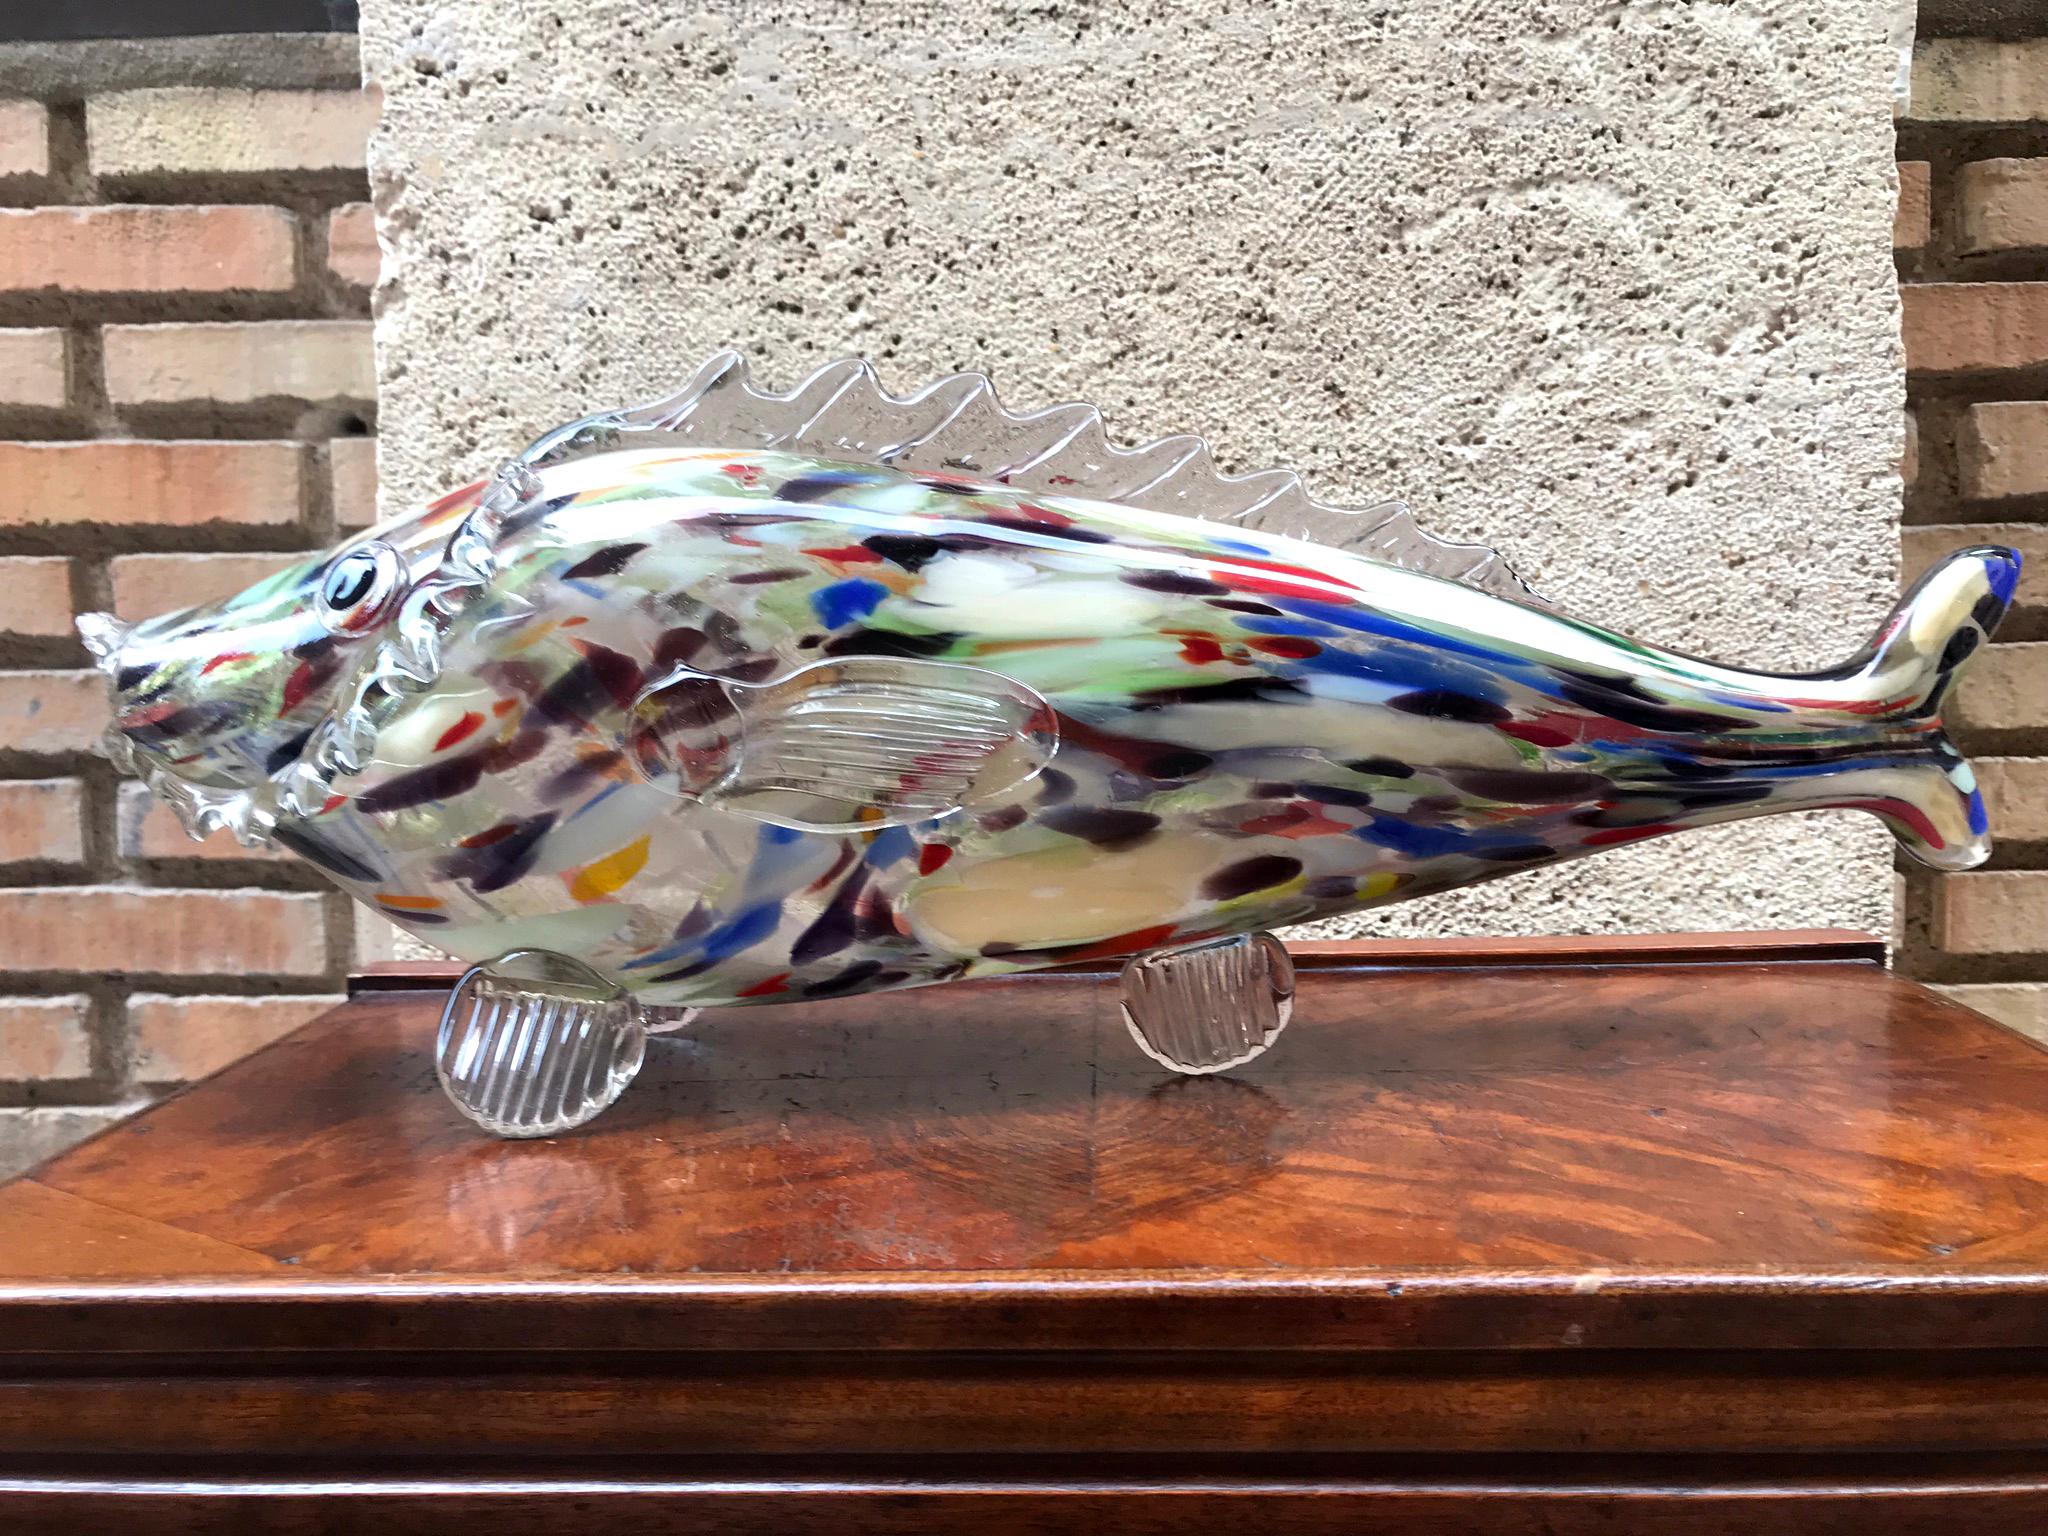 This is a glass-shaped figure in Murano glass in the mid-20th century, it was made in Italy, circa 1940.

This figure is spectacular for its large dimensions and its combination of colors on a perfectly traditionally crafted Murano glass.

Craft